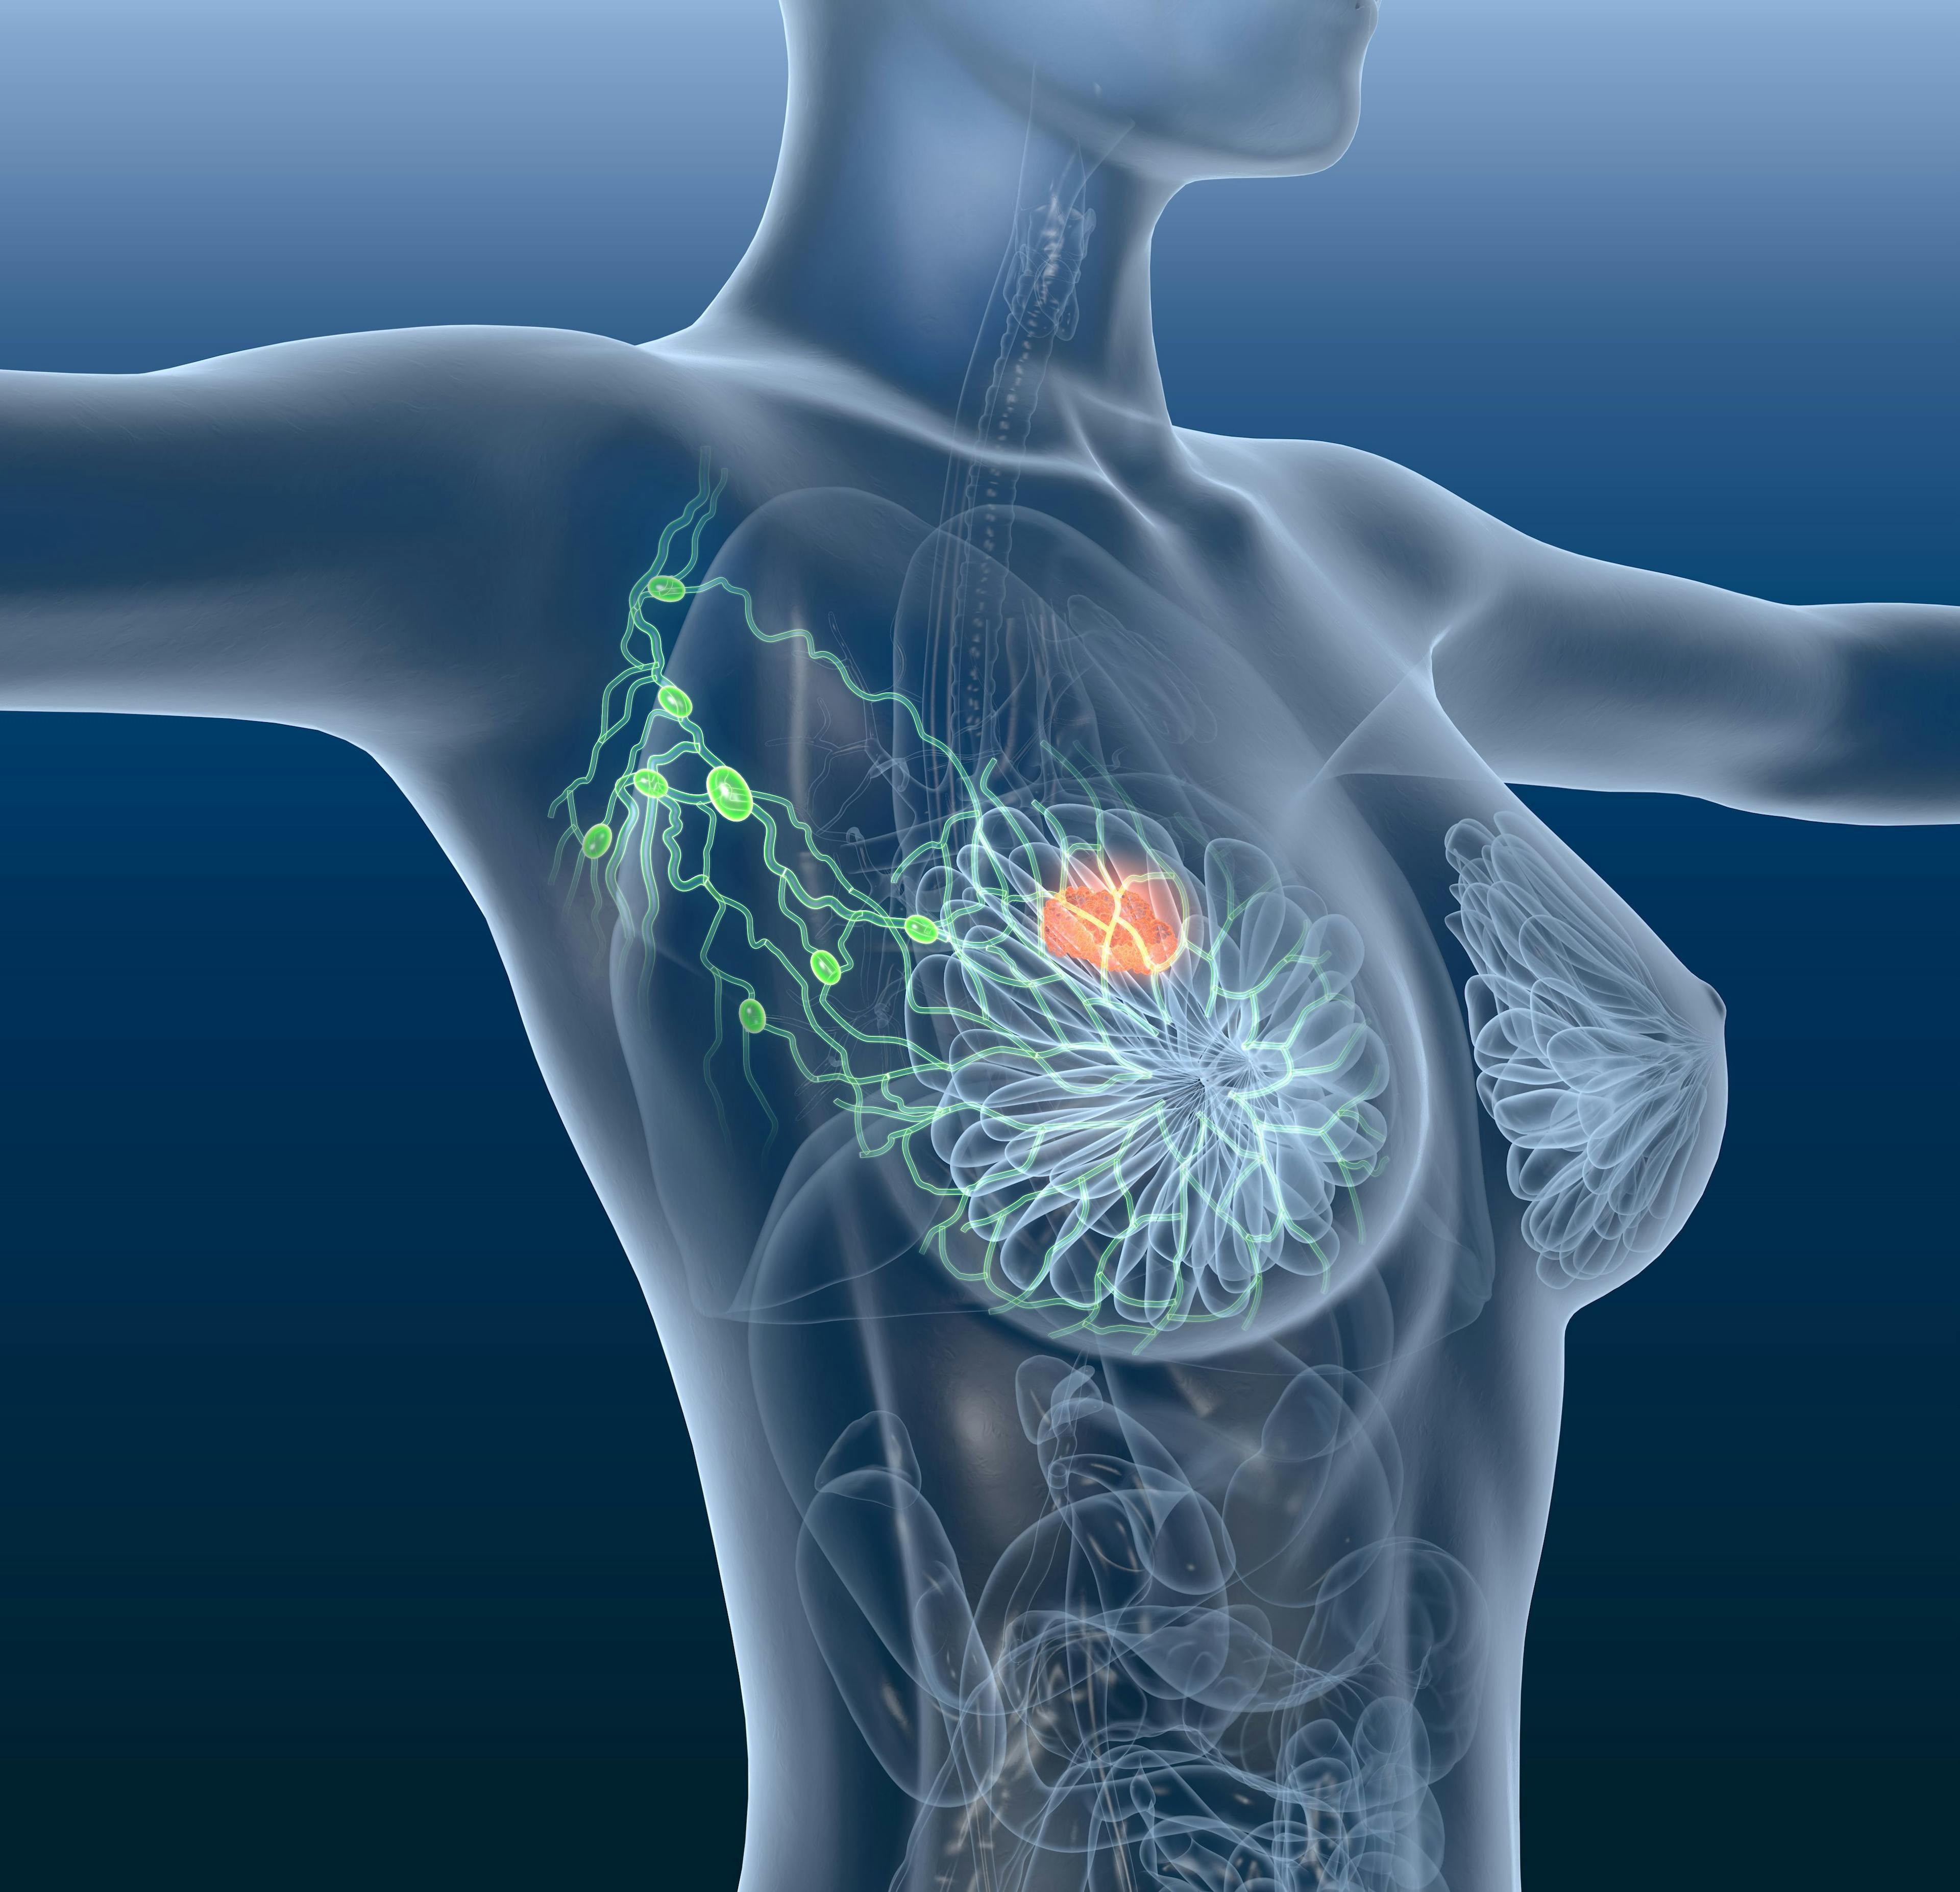 Breast cancer risk was estimated among survivors of pediatric cancer who were treated with chest radiation with a newly developed and validated breast cancer risk prediction model.